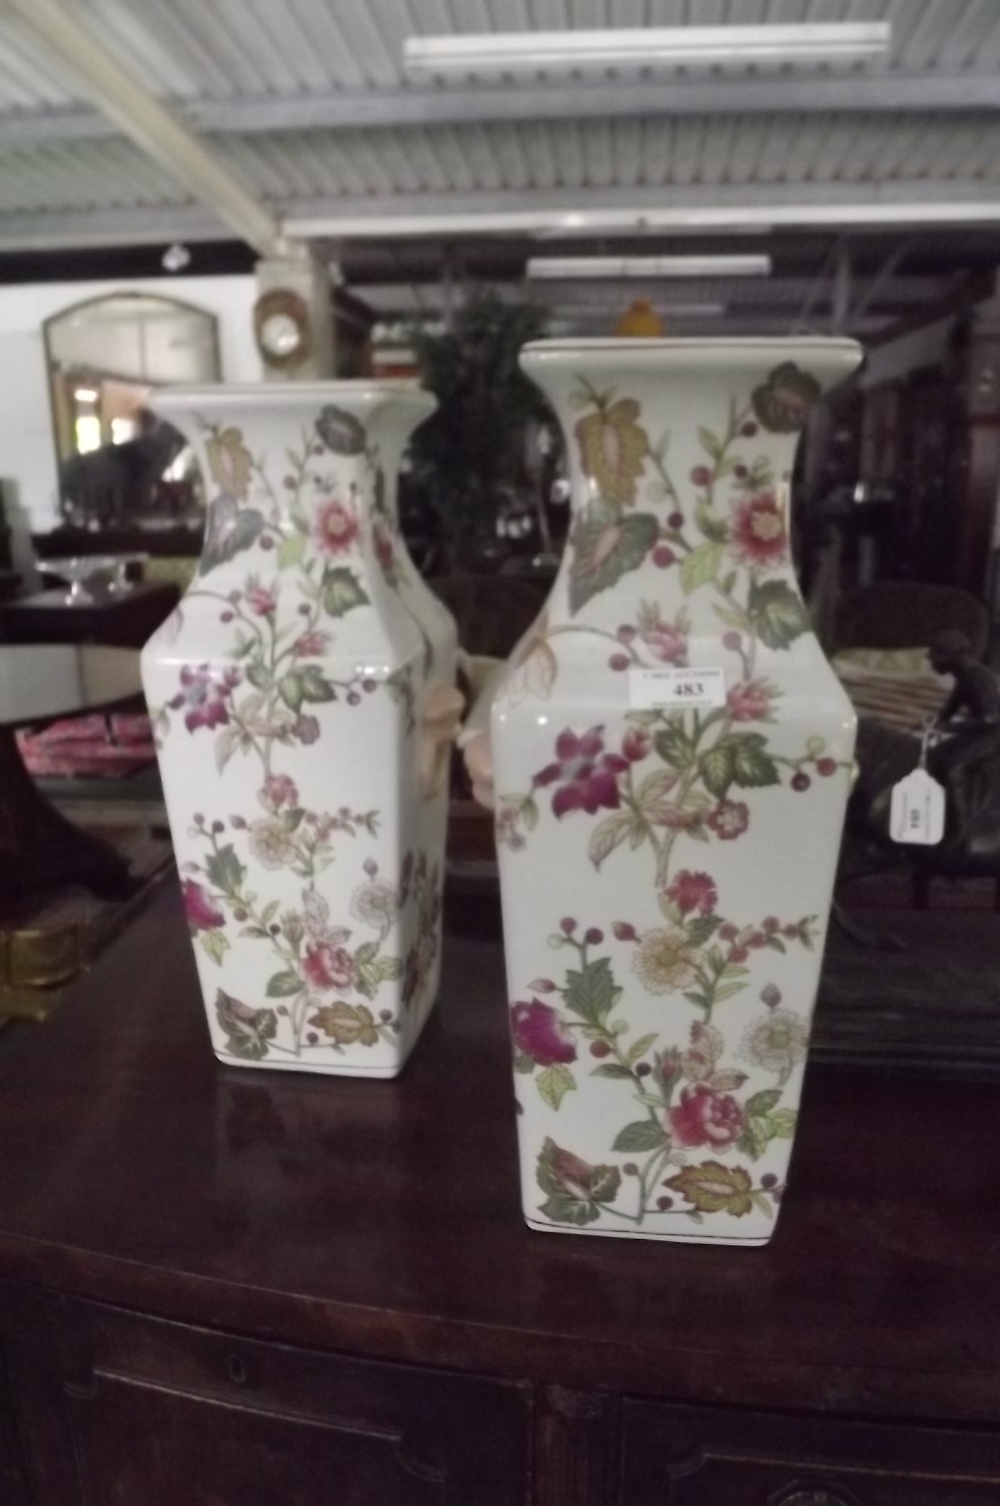 Pair of ceramic vases with floral patter